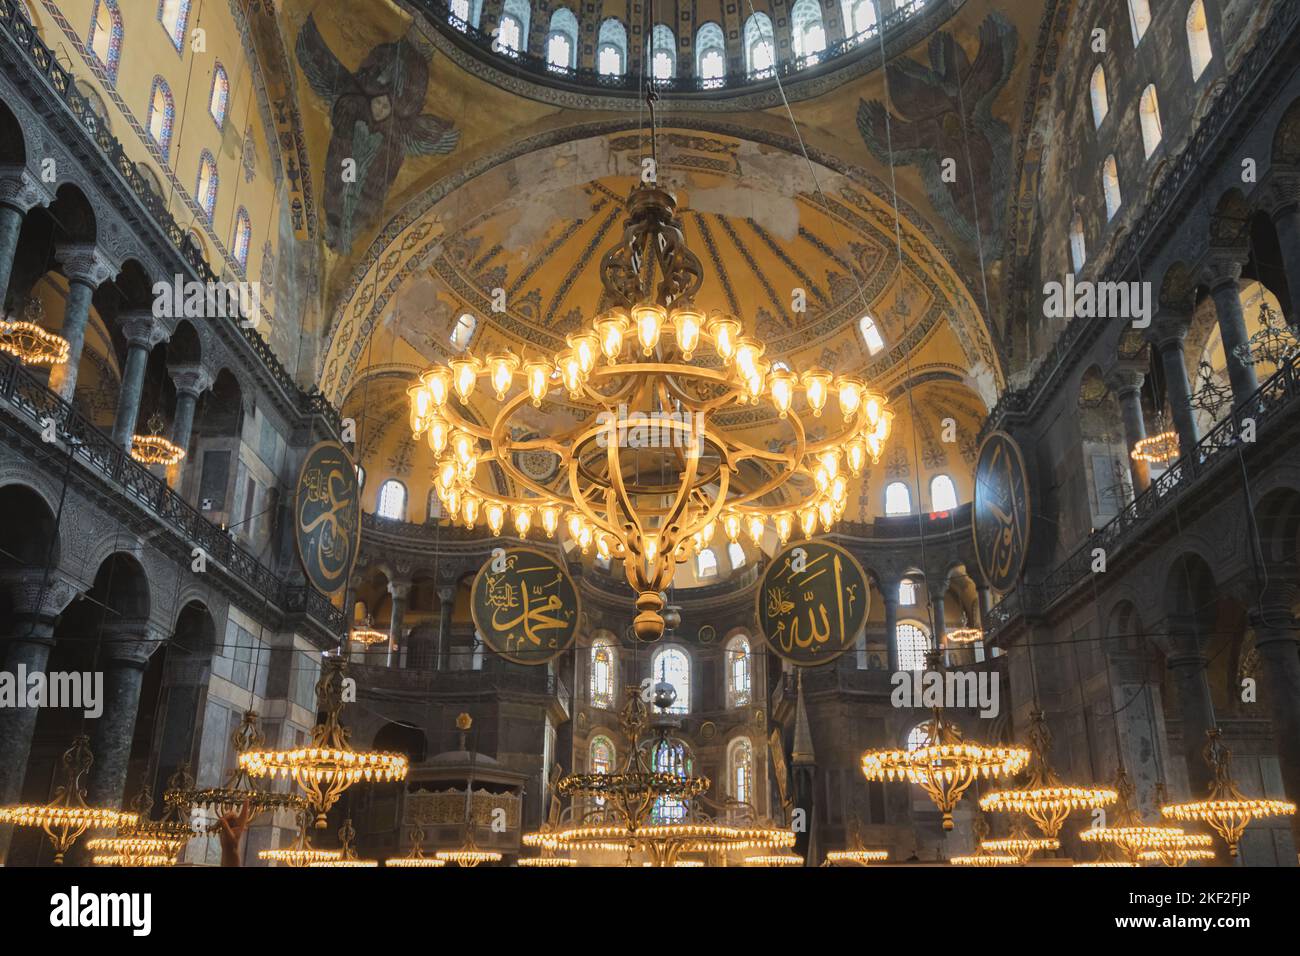 Istanbul, Turkey - October 1 2022: Interior of the iconic Hagia Sophia, once a Byzantine Church converted to a mosque by the Ottomans in the tourist d Stock Photo